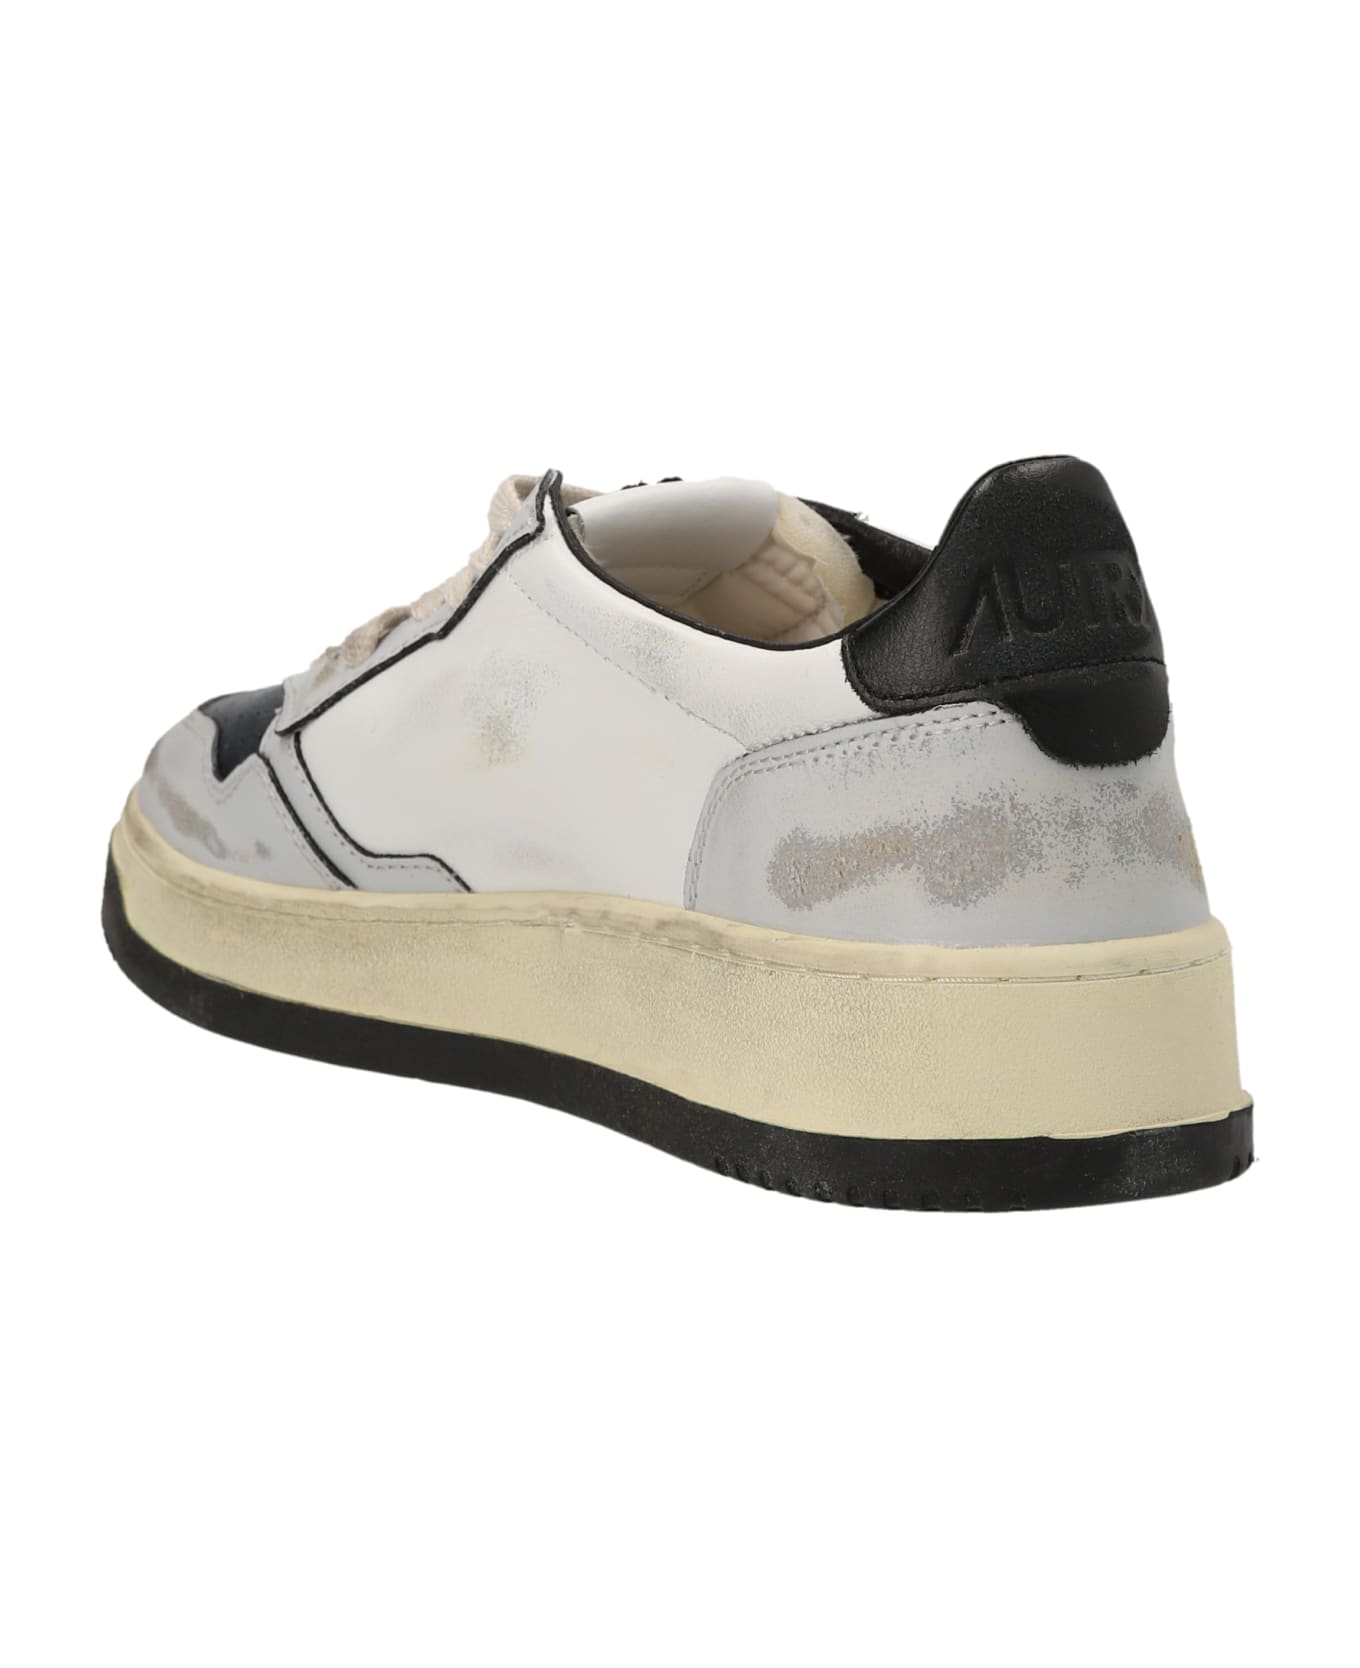 Autry Sup Vint Sneakers In White Leather - white スニーカー